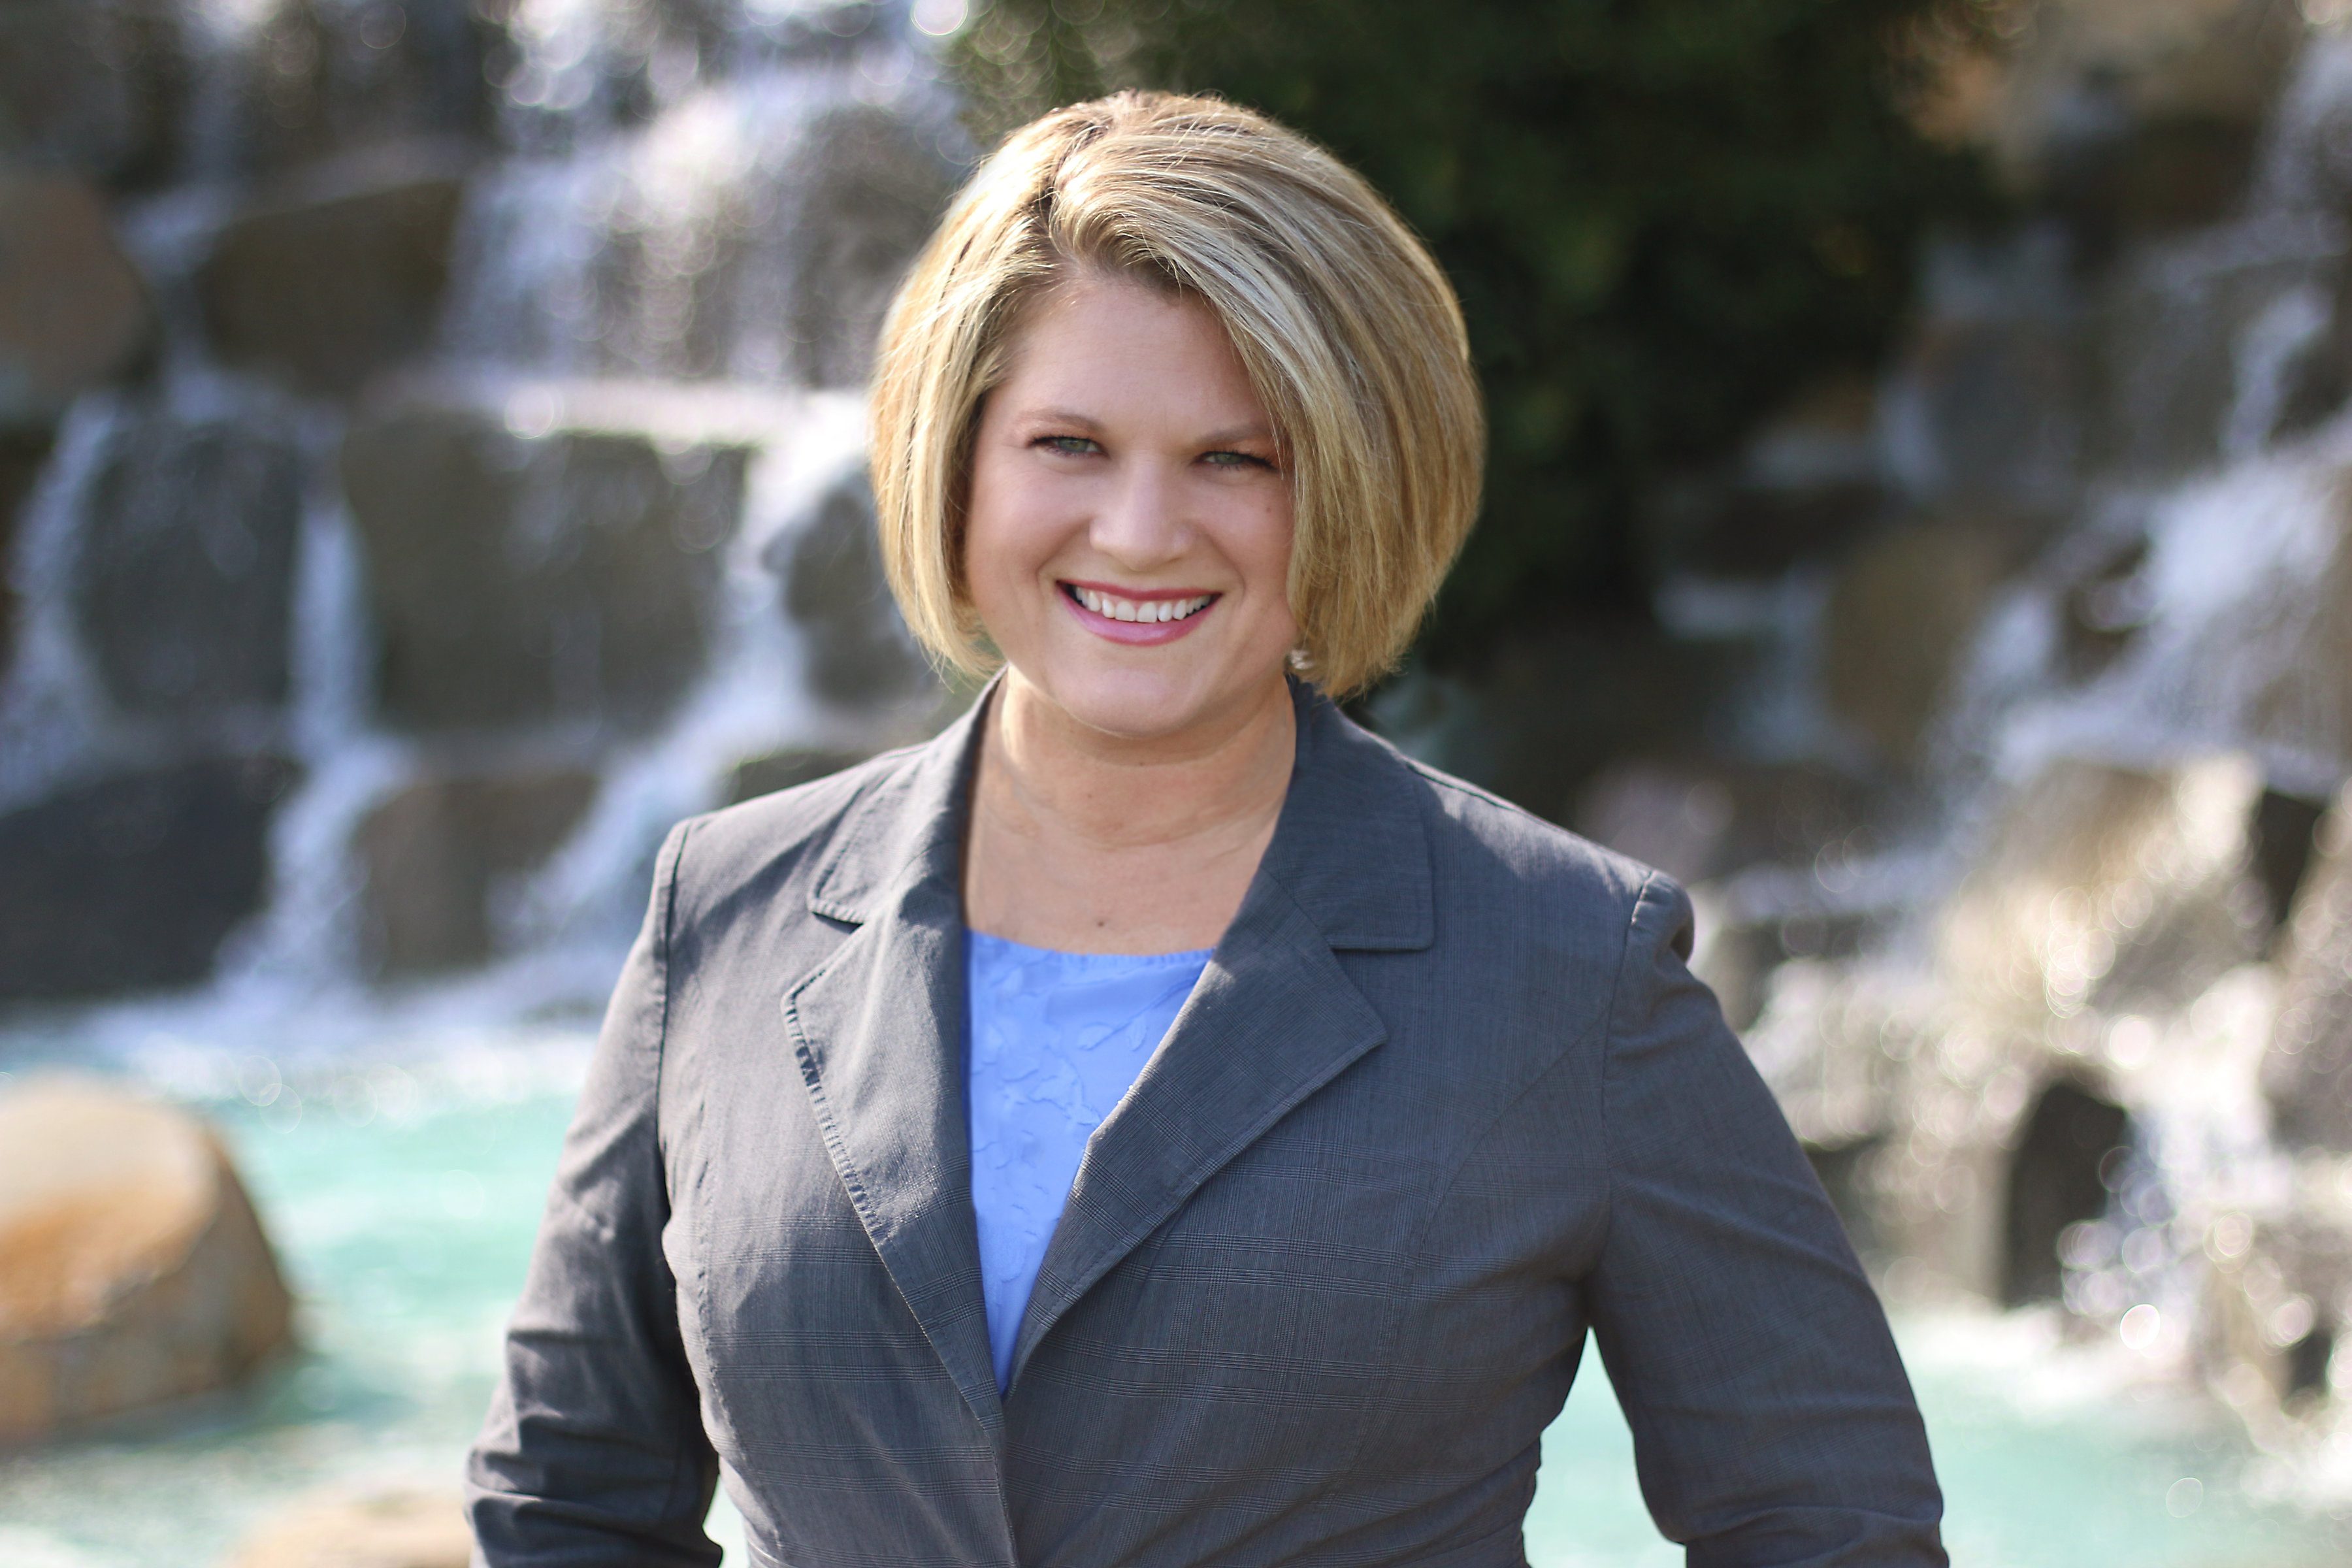 Jennifer Stanford, a career coach and consultant, will give the keynote presentation at the next Women in Leadership meeting on Jan. 16, 2018, during the Adventist Ministries Convention.